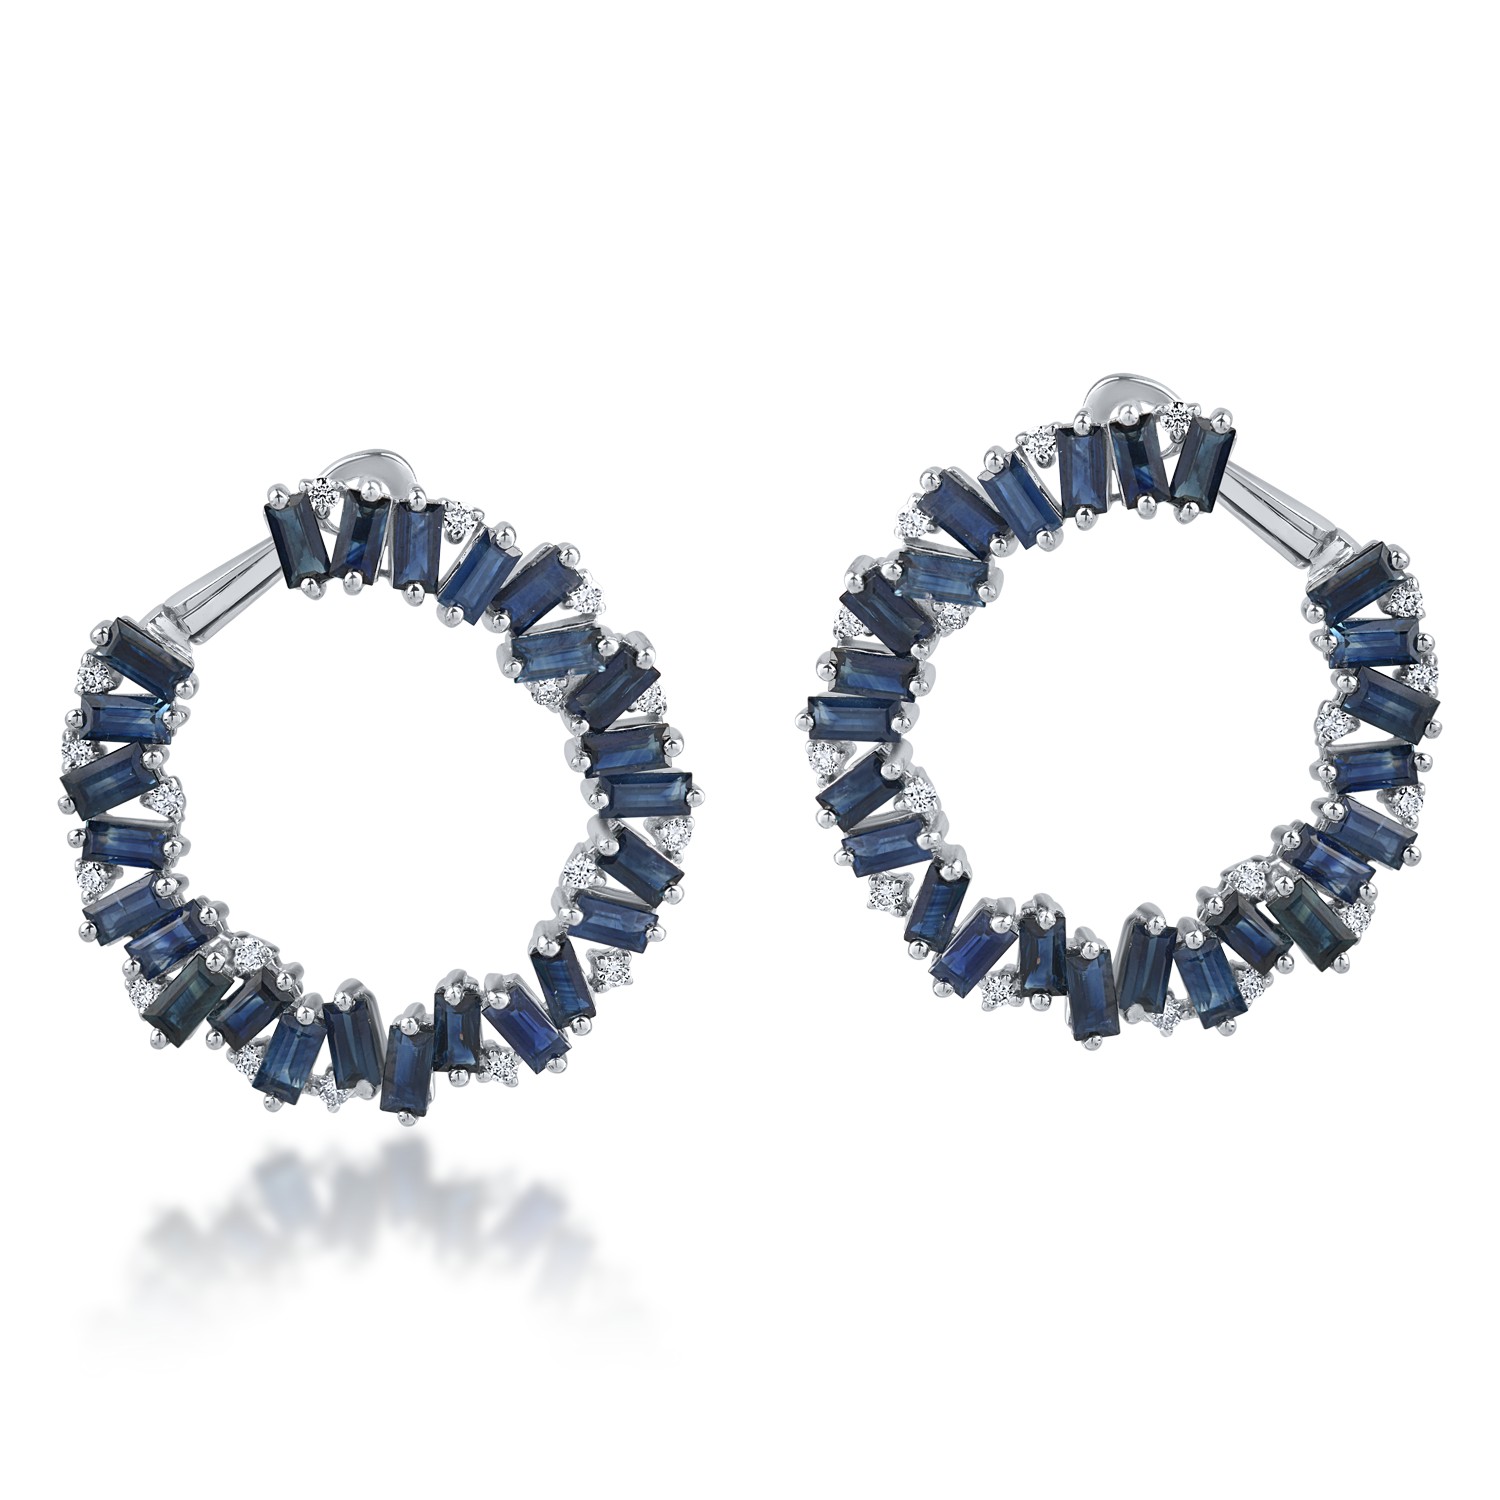 White gold earrings with 8.3ct sapphires and 0.48ct diamonds